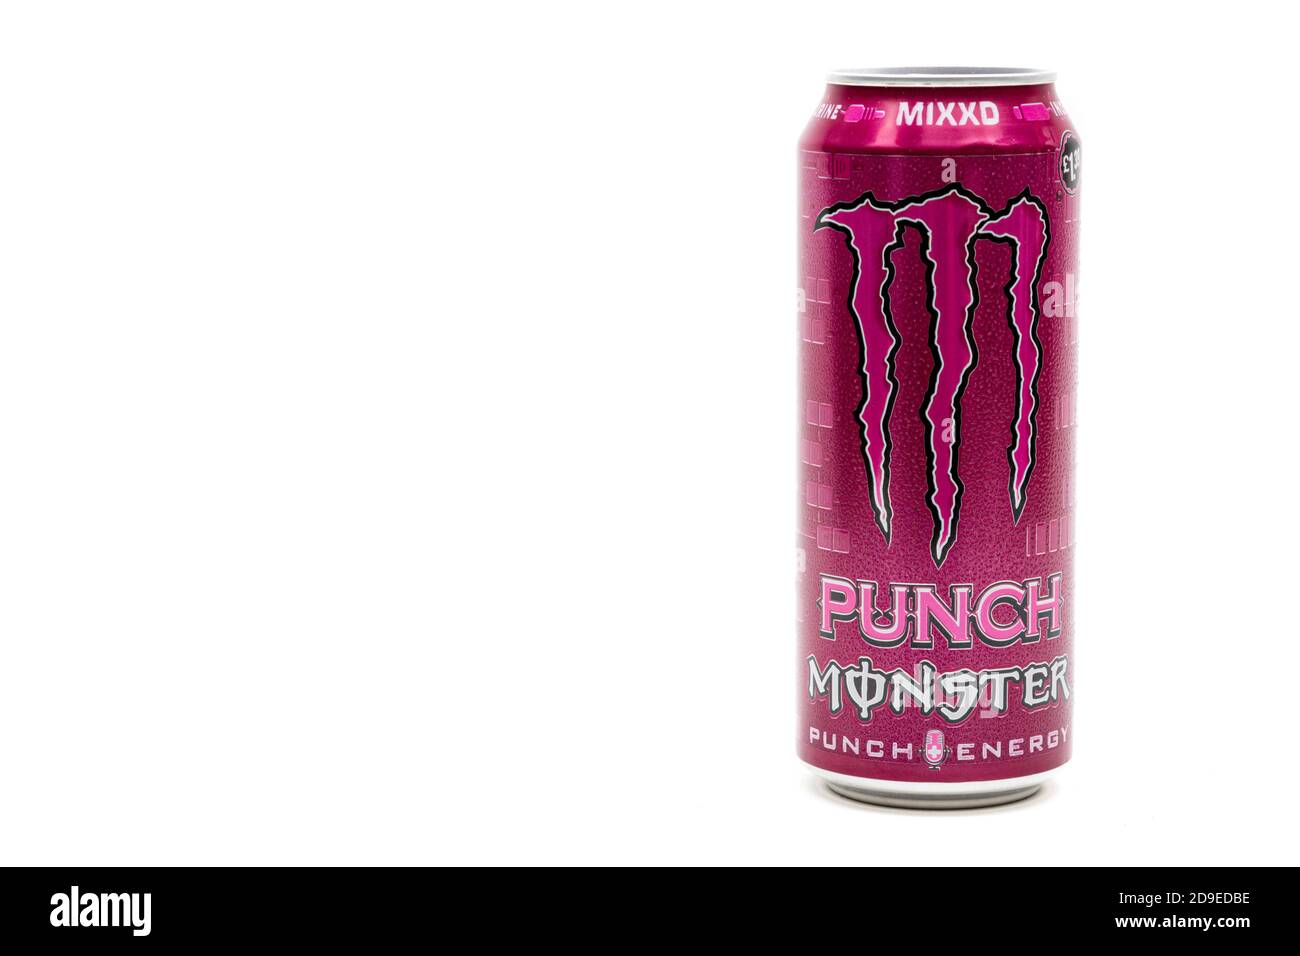 London, United Kingdom, 14th October 2020:- A Can of Monster MIXXD Punch  Energy Drink Isolated on a white background Stock Photo - Alamy